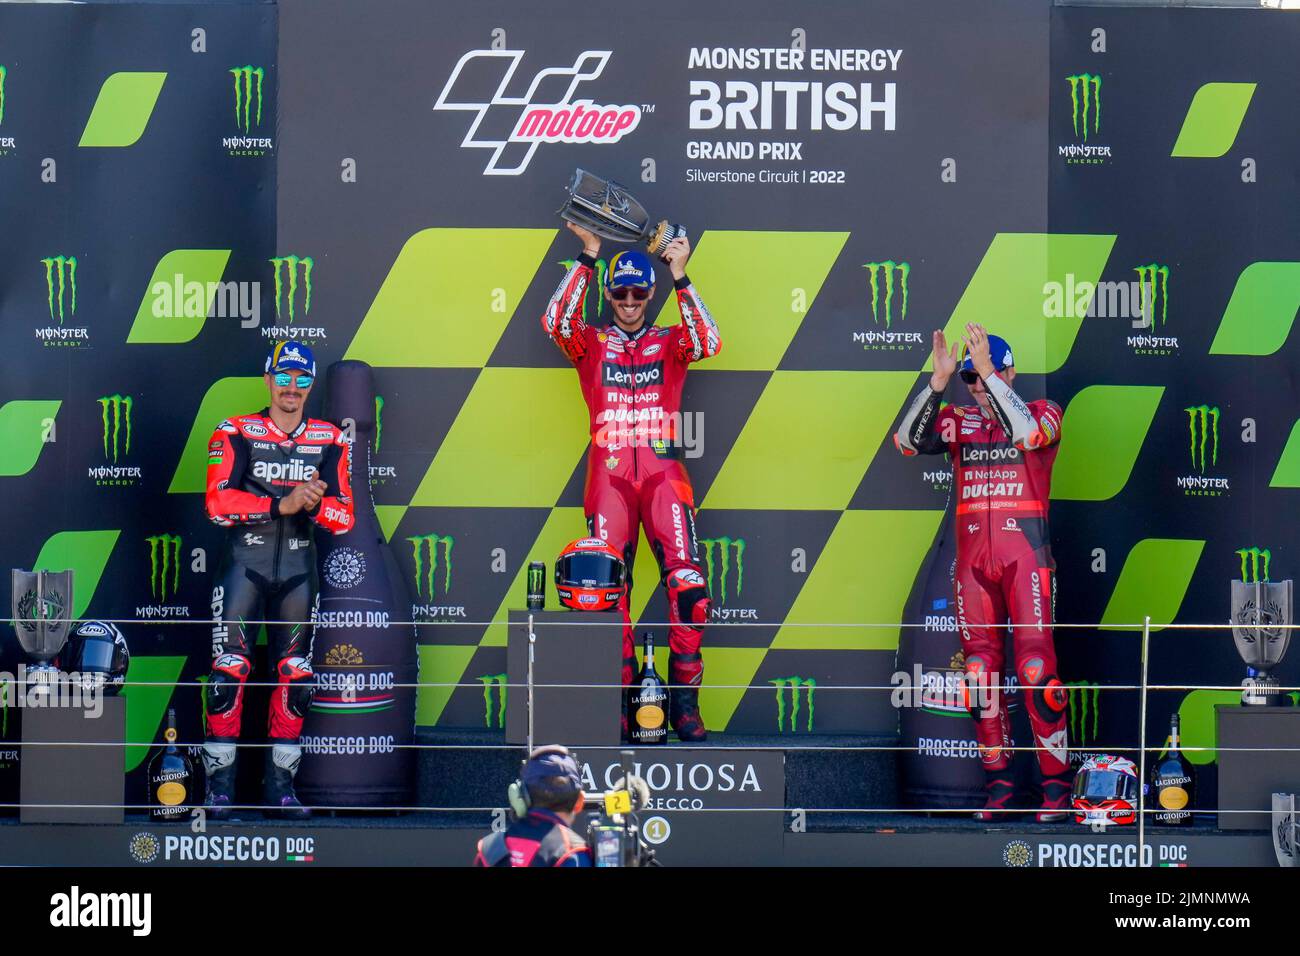 Towcester, UK. 07th Aug, 2022. Francesco BAGNAIA (Italy) of the Ducati Lenova Team (centre) celebrates on the podium with Maverick VINALES (Spain) of the Aprilia Racing Team (left) and Jack MILLER (Australia) of the Ducati Lenova Team (right) after finishing first, second and third respectively in the 2022 Monster Energy Grand Prix Race at Silverstone Circuit, Towcester, England on the 7th August 2022. Photo by David Horn. Credit: PRiME Media Images/Alamy Live News Stock Photo